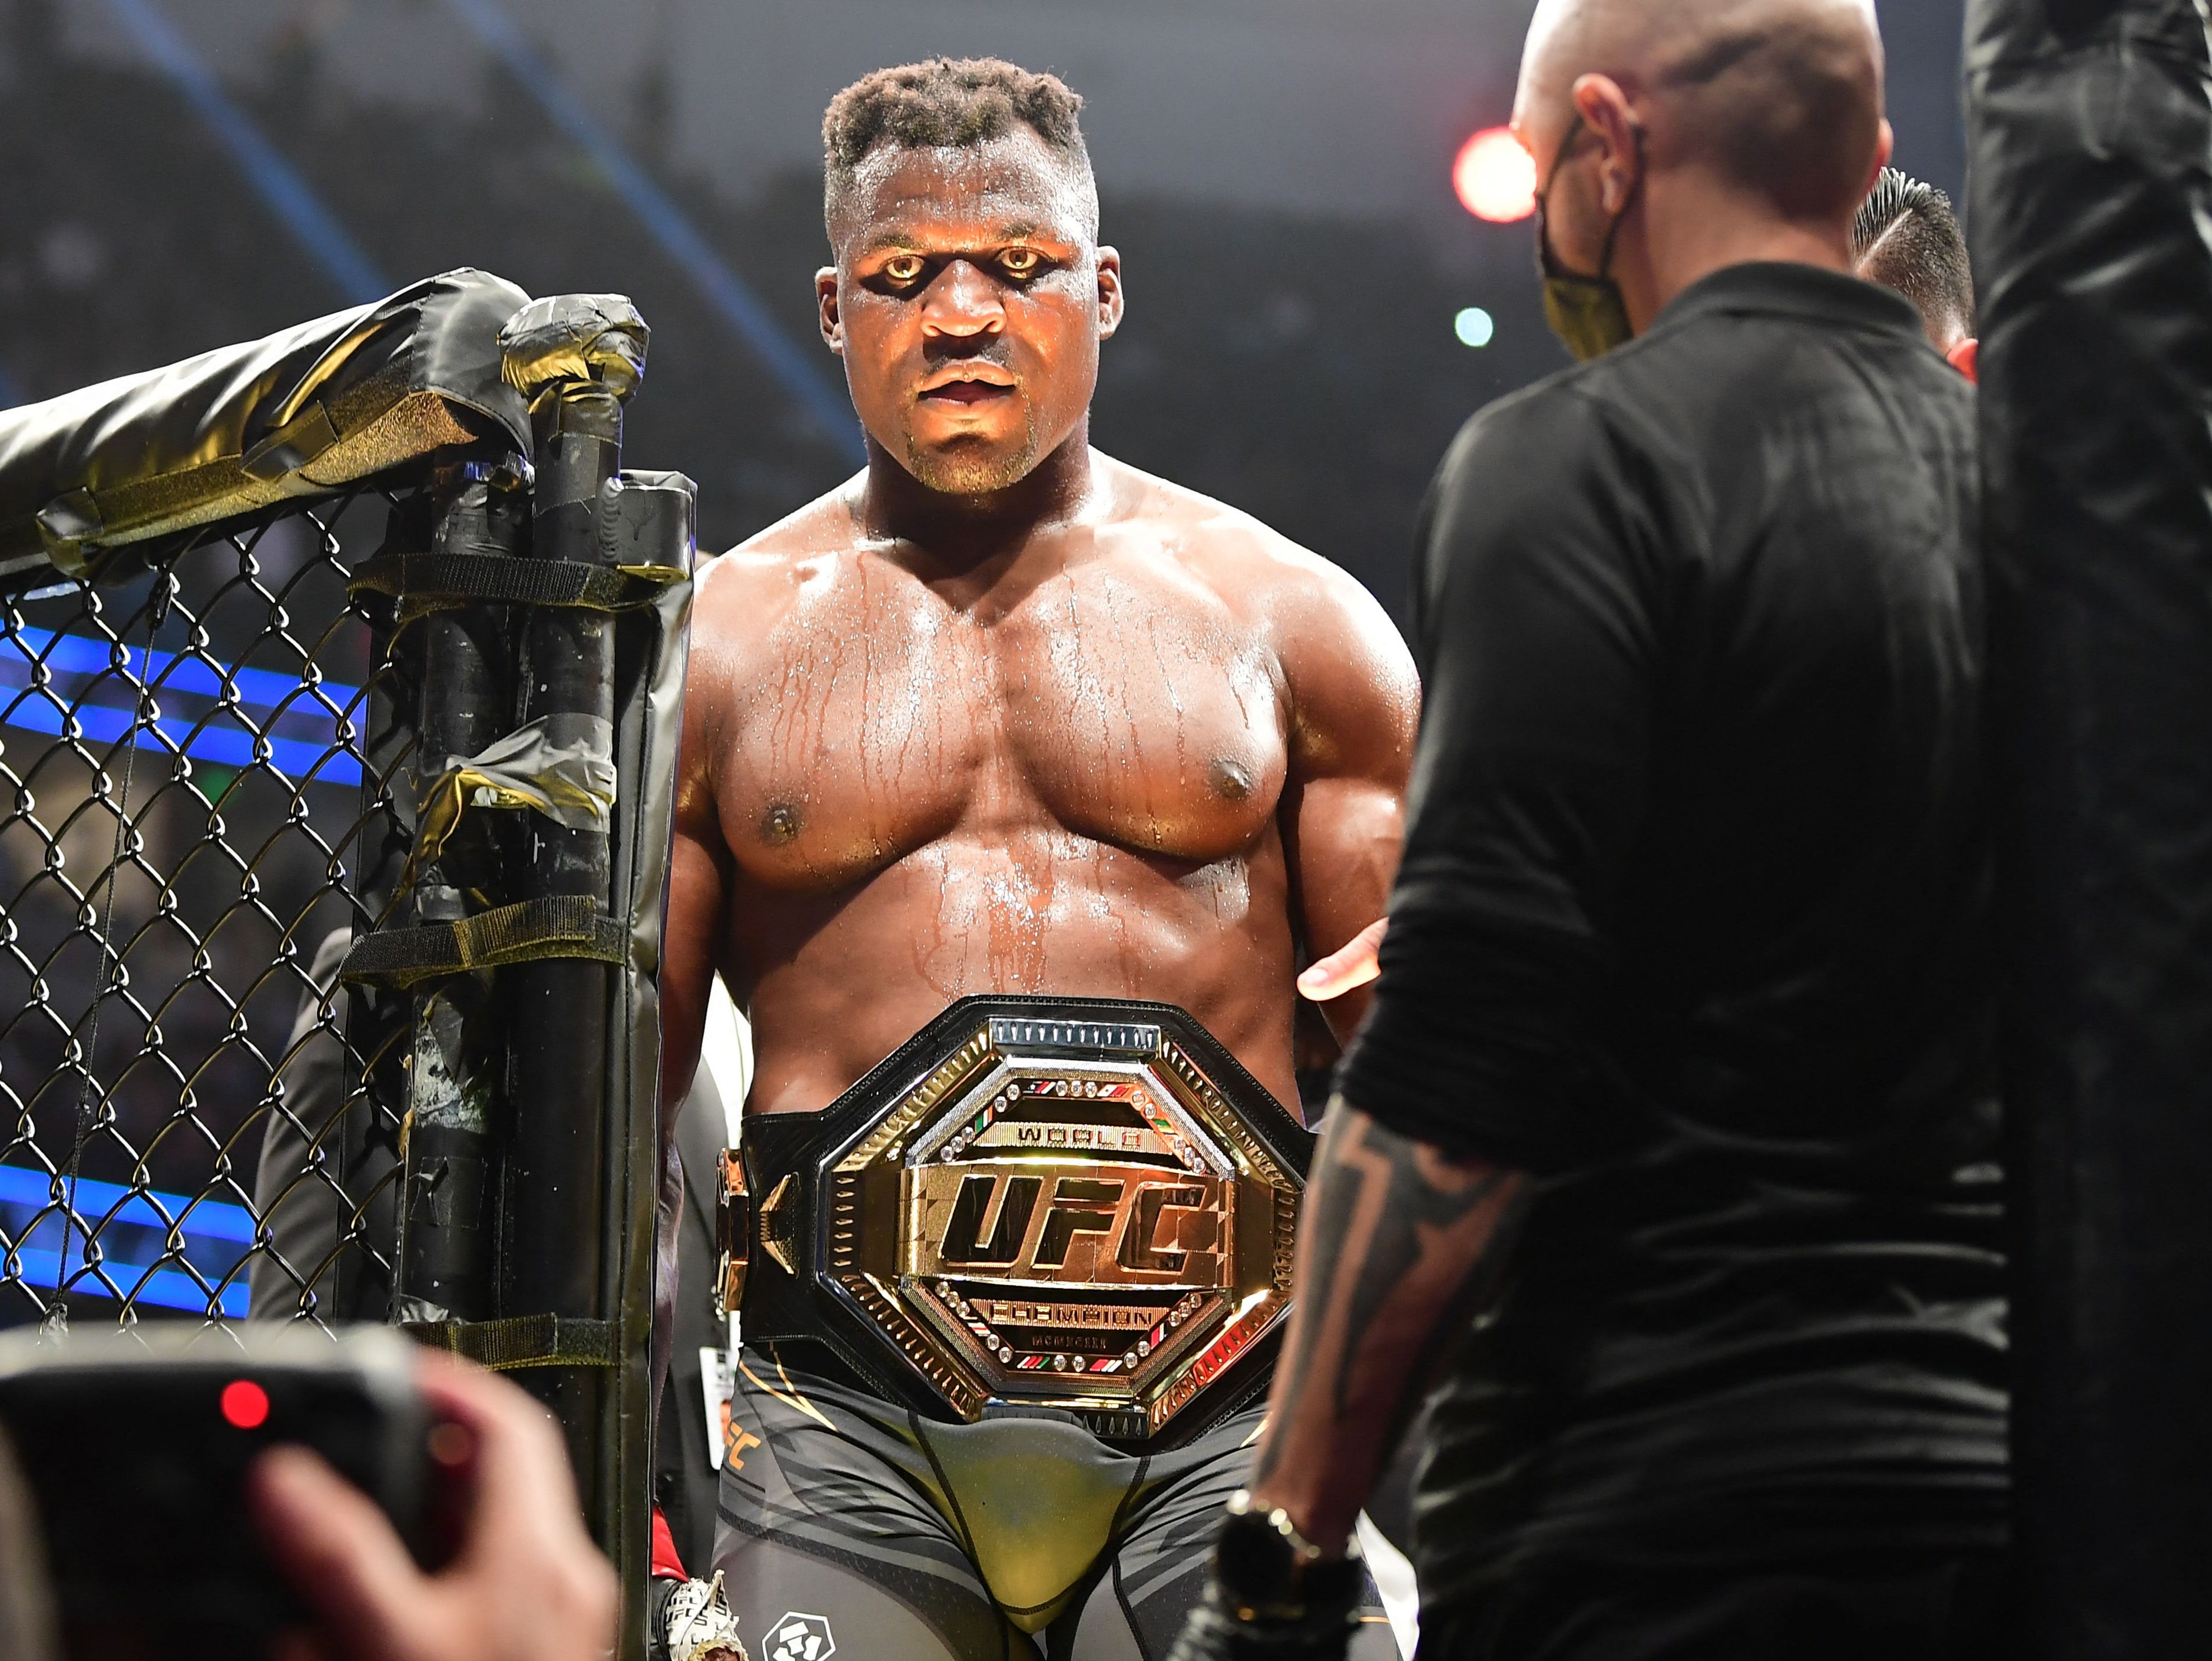 Francis Ngannou retained the UFC heavyweight title against Ciryl Gane